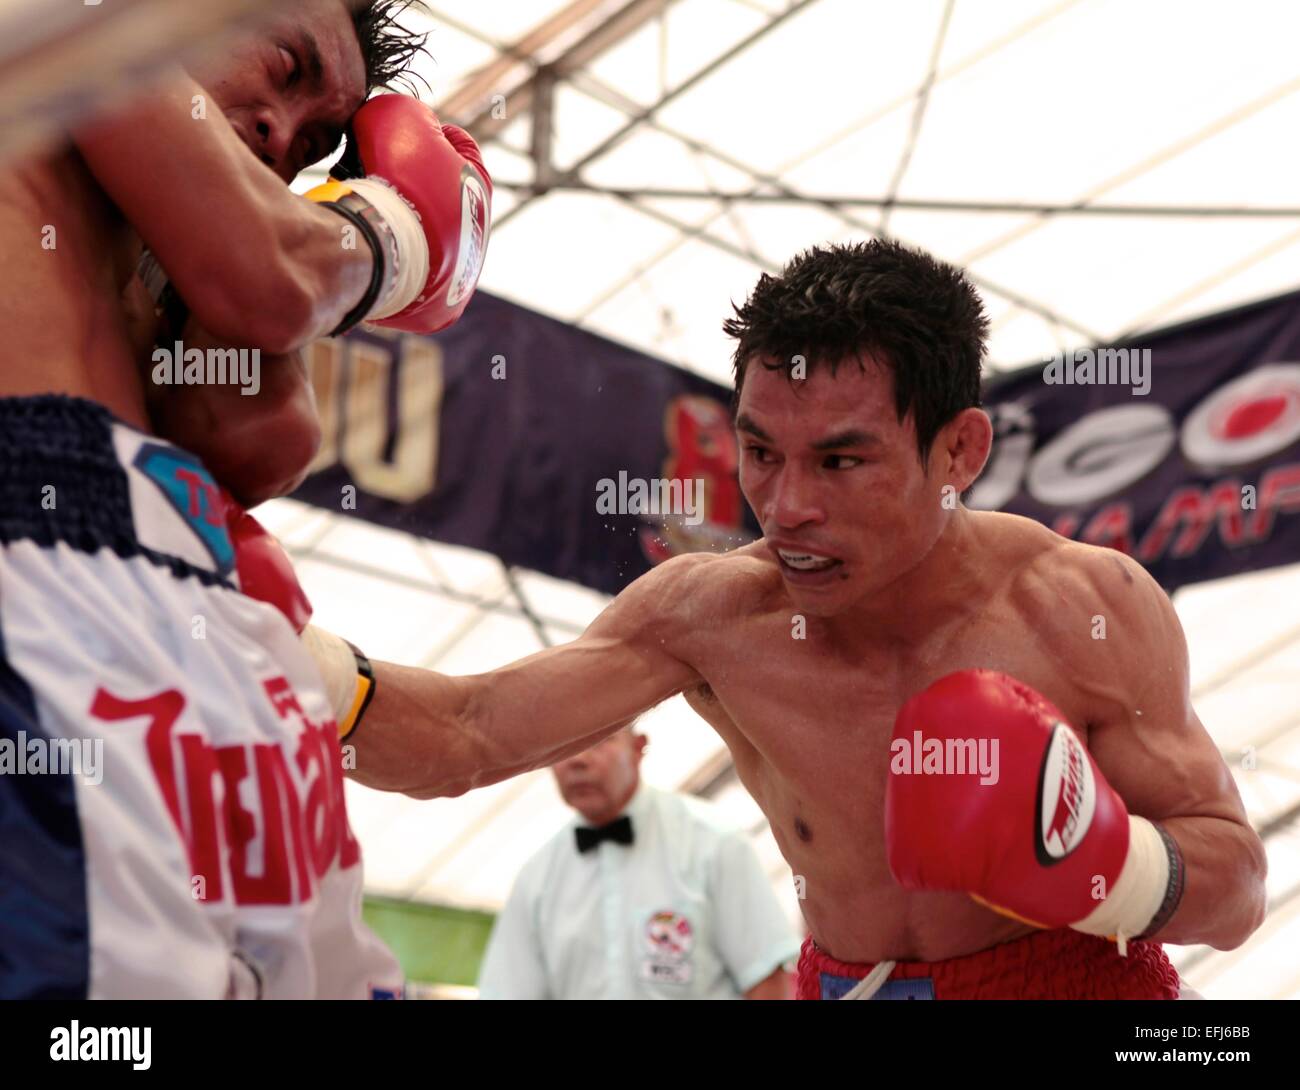 Nakhon Sawan, Thailand. 05th Feb, 2015. Thailand's Wanheng Menayothin (right) successfully defends his WBC strawweight title against challenger Jeffery Galero of the Philippines, winning by unanimous decision in Nakhon Sawan, Thailand, 5 Feb 2015. Credit:  Arthur Jones Dionio/Alamy Live News Stock Photo